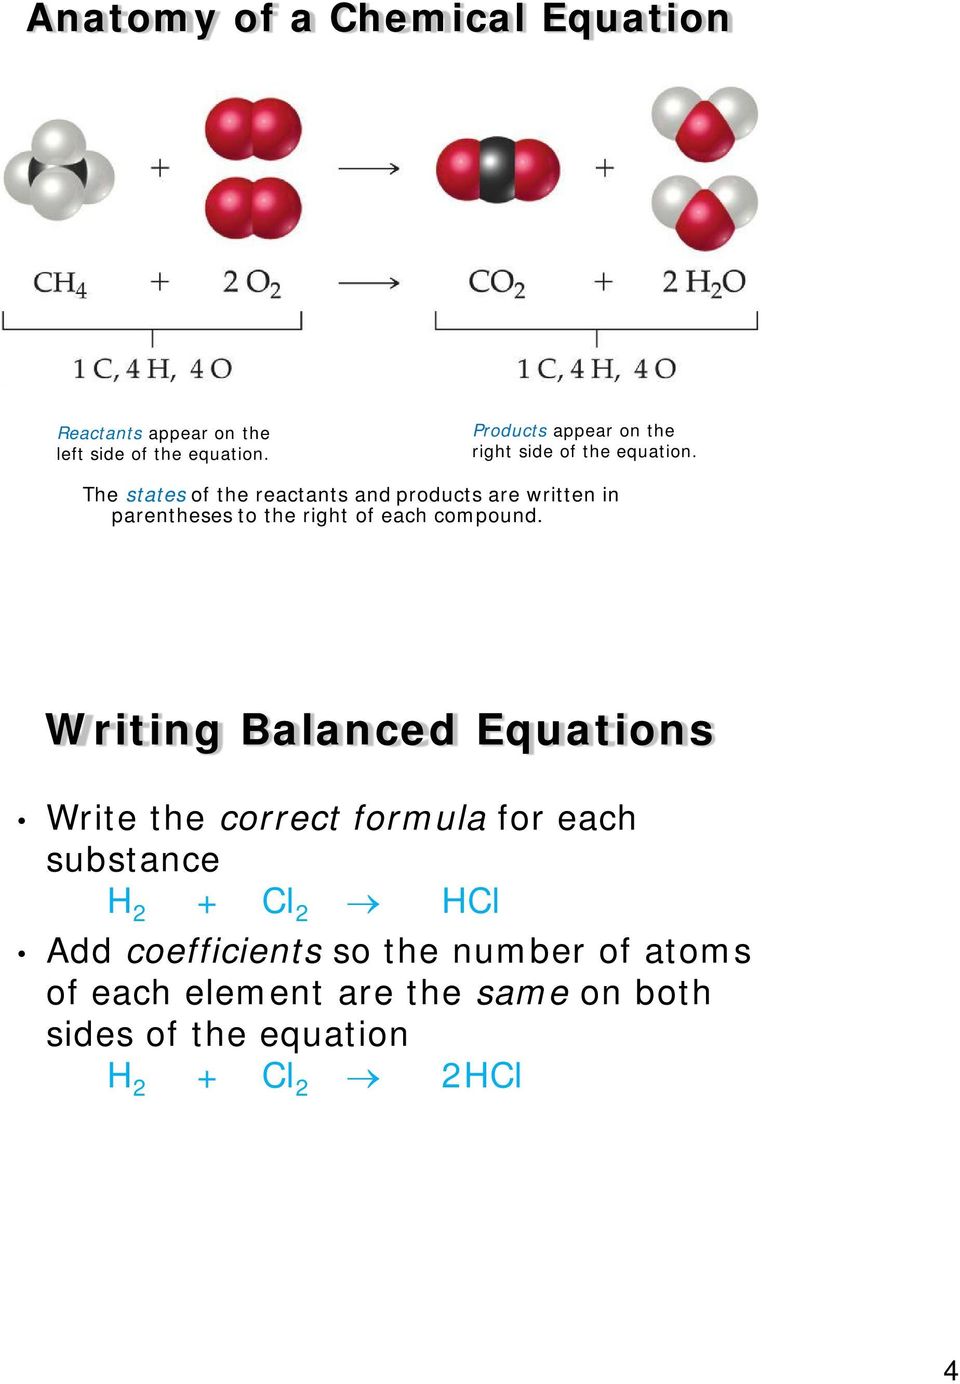 The states of the reactants and products are written in parentheses to the right of each compound.